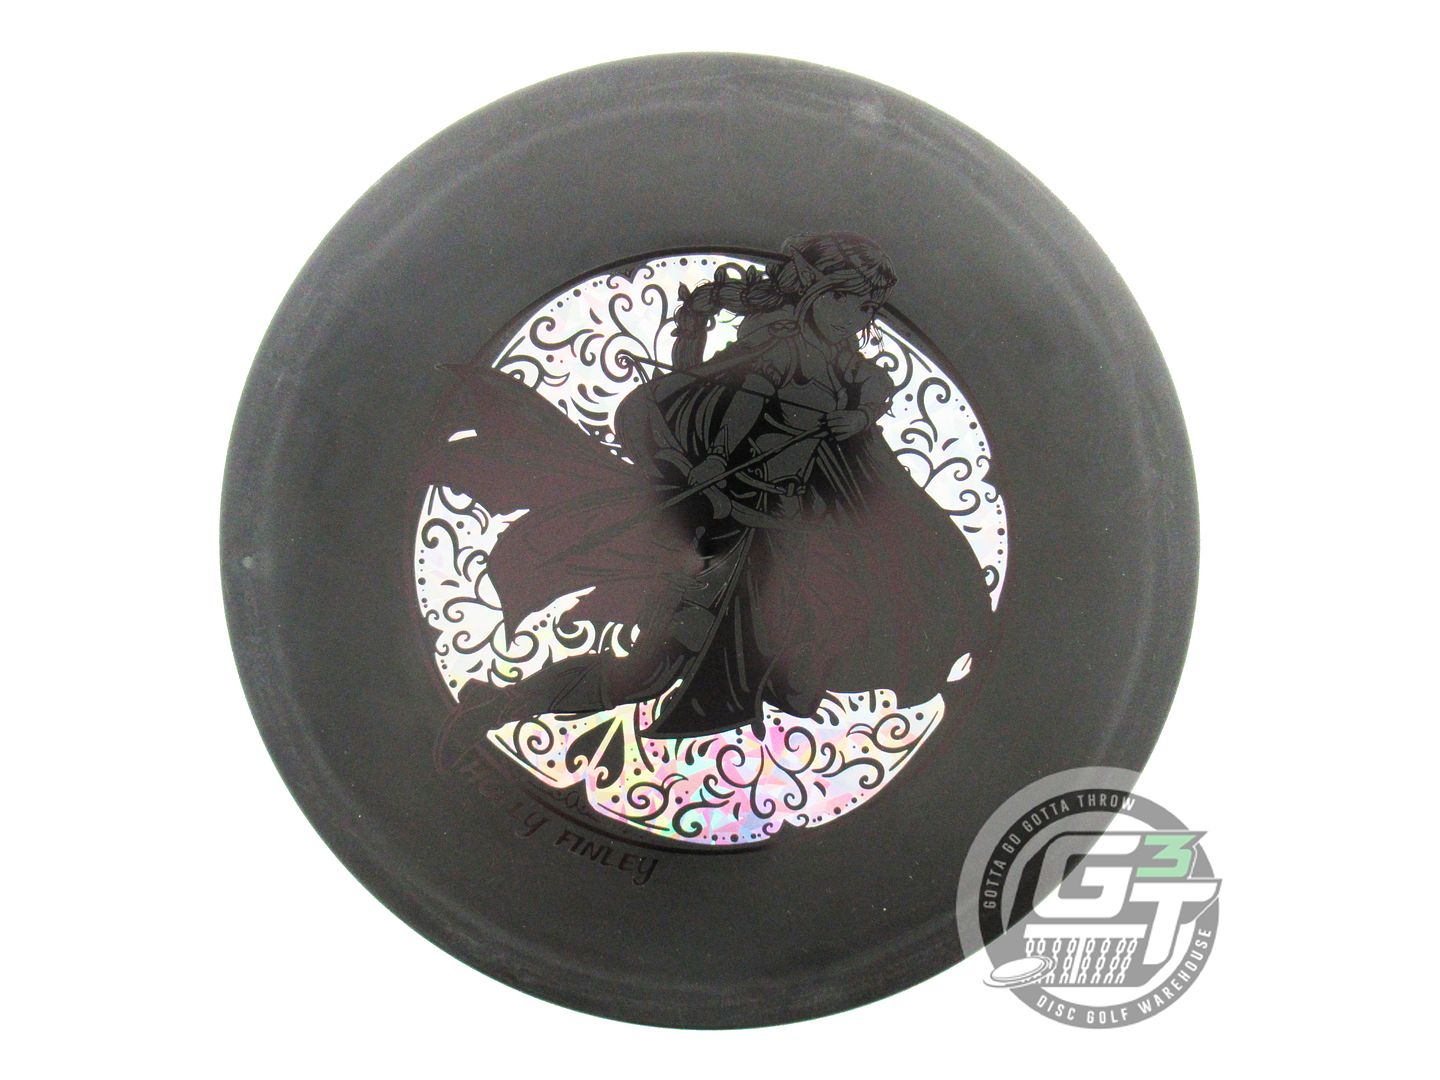 Infinite Discs Limited Edition 2023 Signature Holly Finley D-Blend Tomb Putter Golf Disc (Individually Listed)